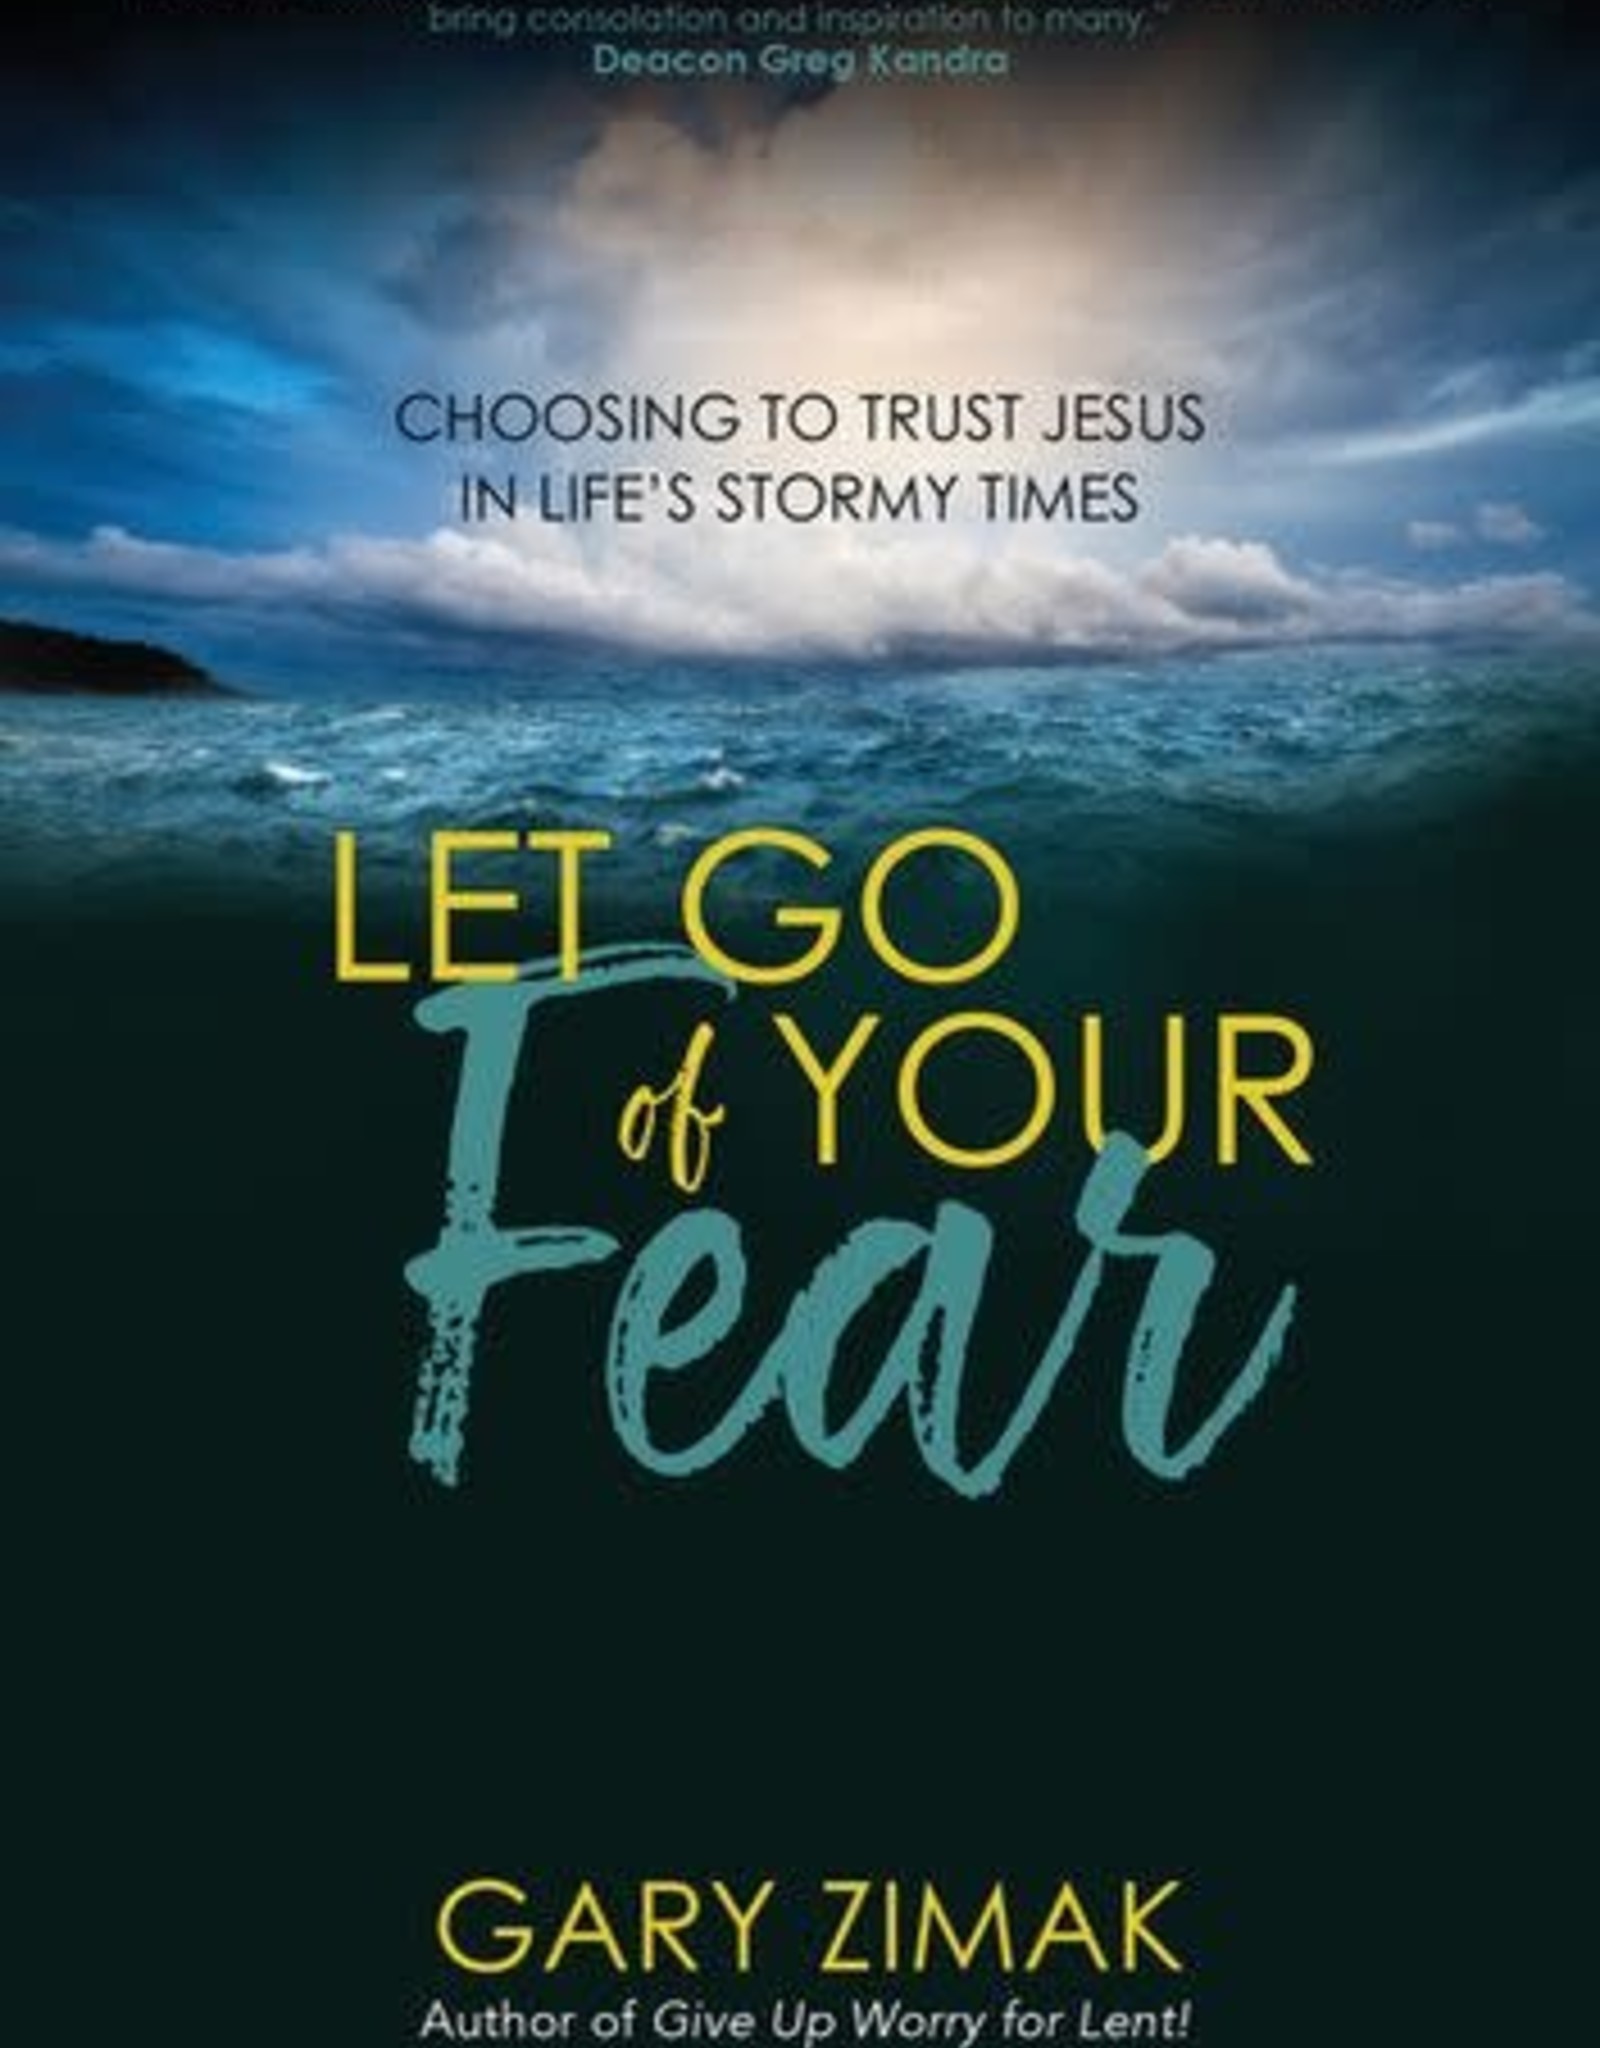 Fear:　More　Zimak　your　of　Go　Books,　Goods　Life's　Choosing　Trust　Stormy　Times,　Jesus　Credo:　Catholic　in　(paperback)　by　Gary　Let　to